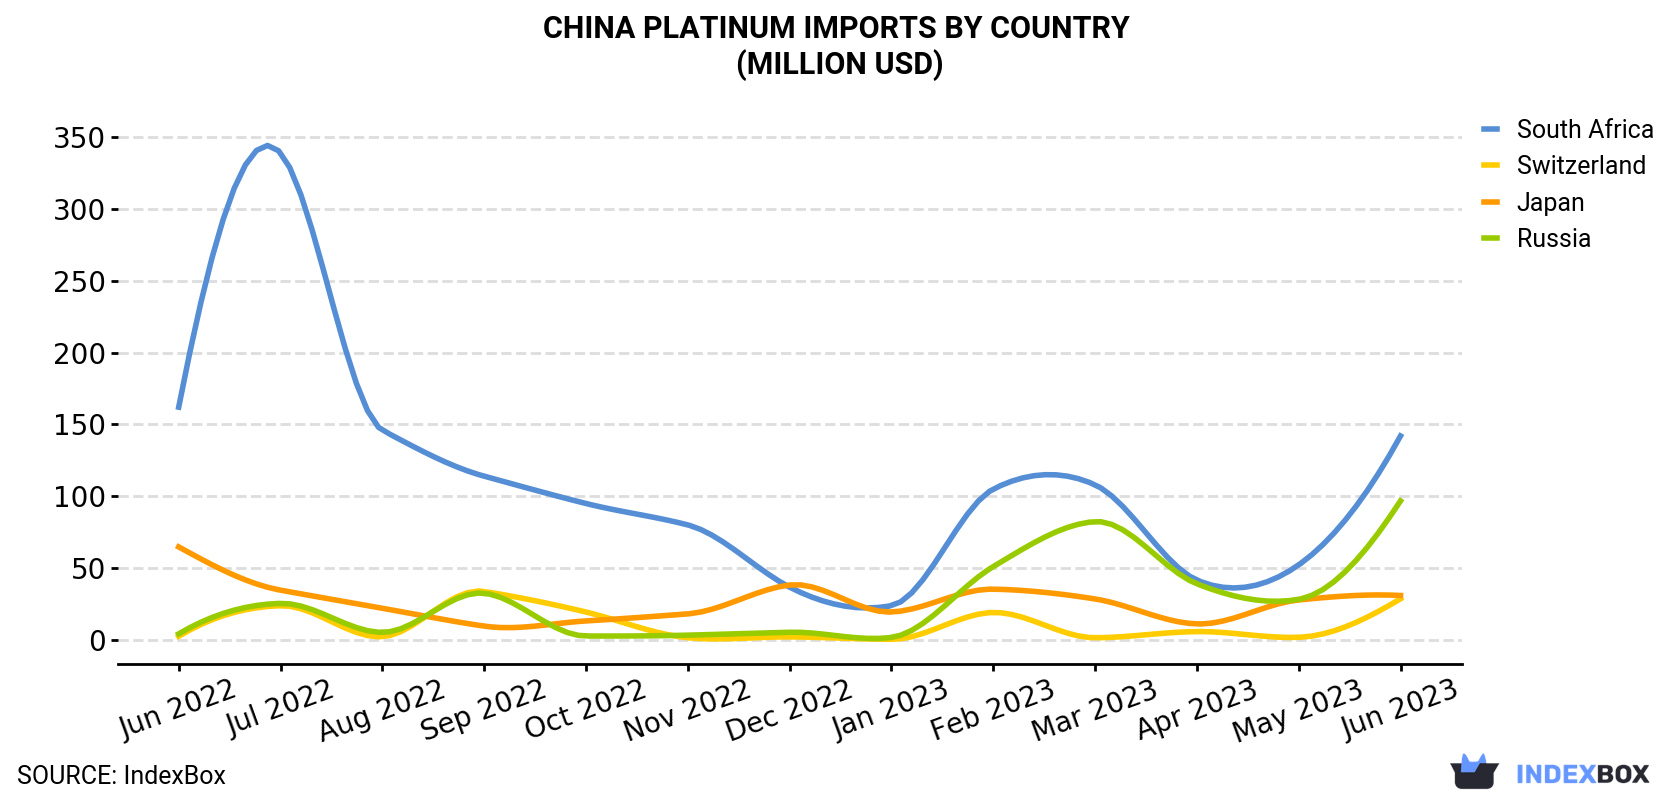 China Platinum Imports By Country (Million USD)